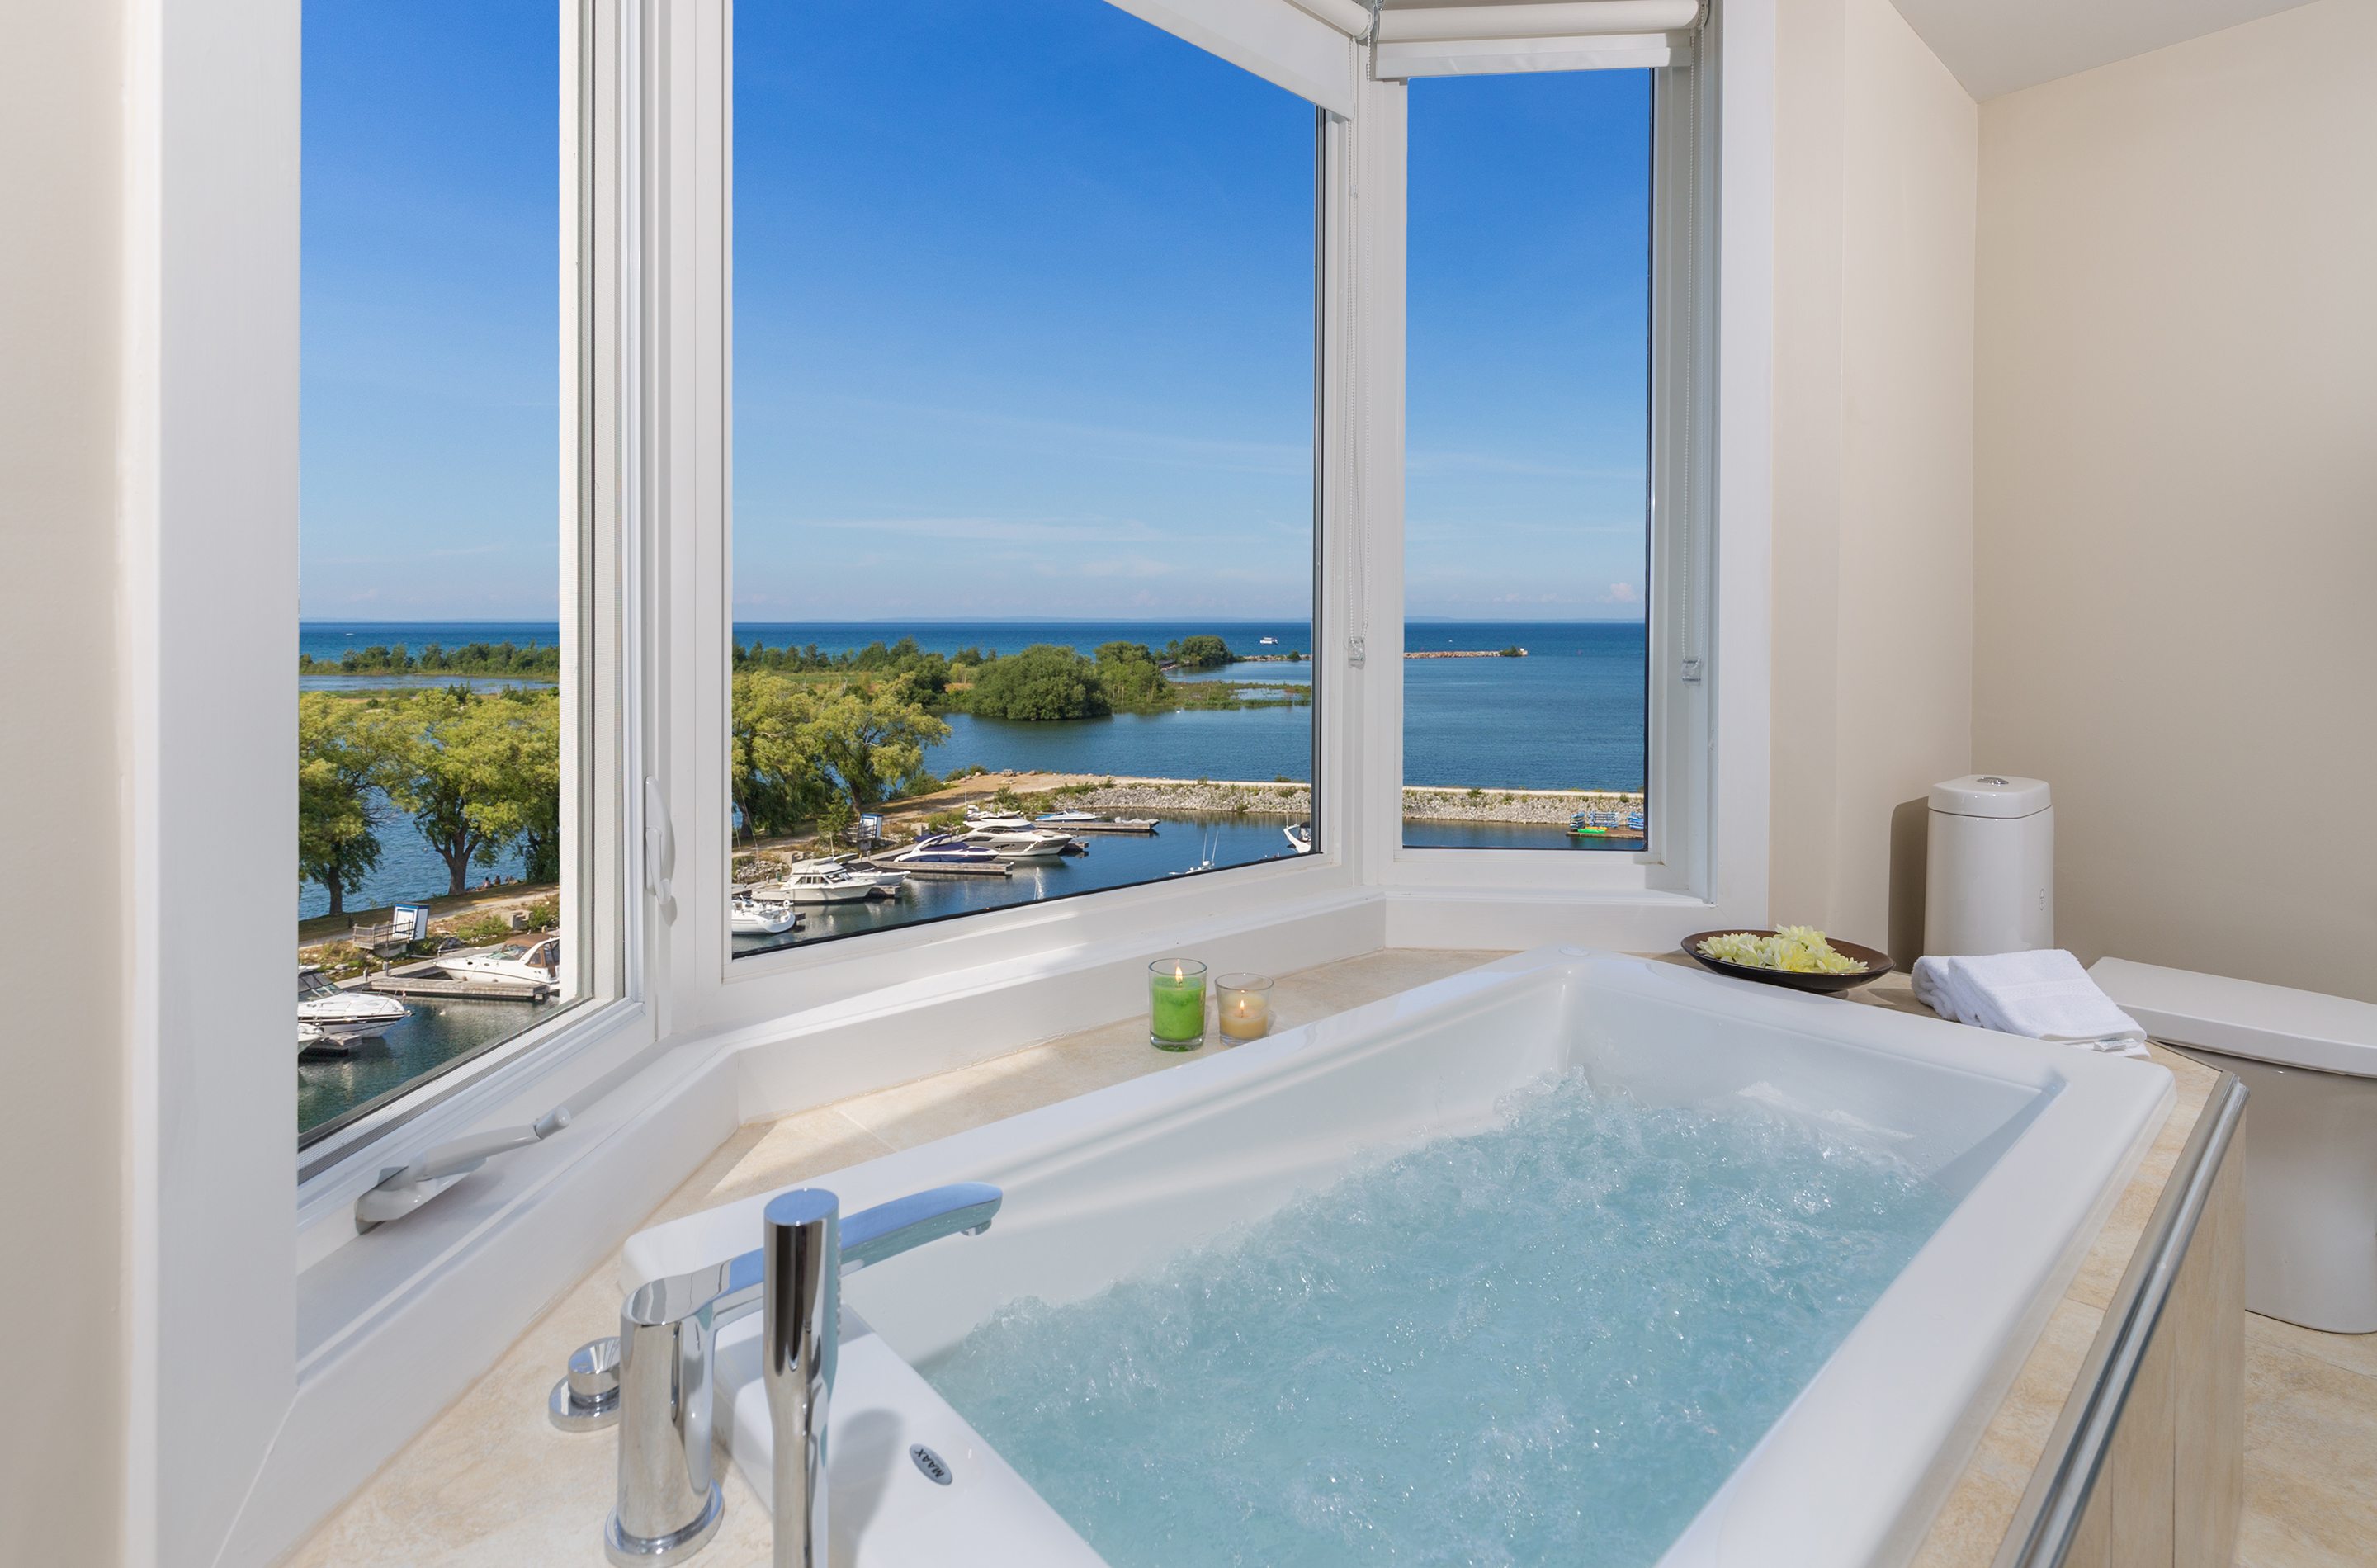 Image of a bathtub overlooking the water